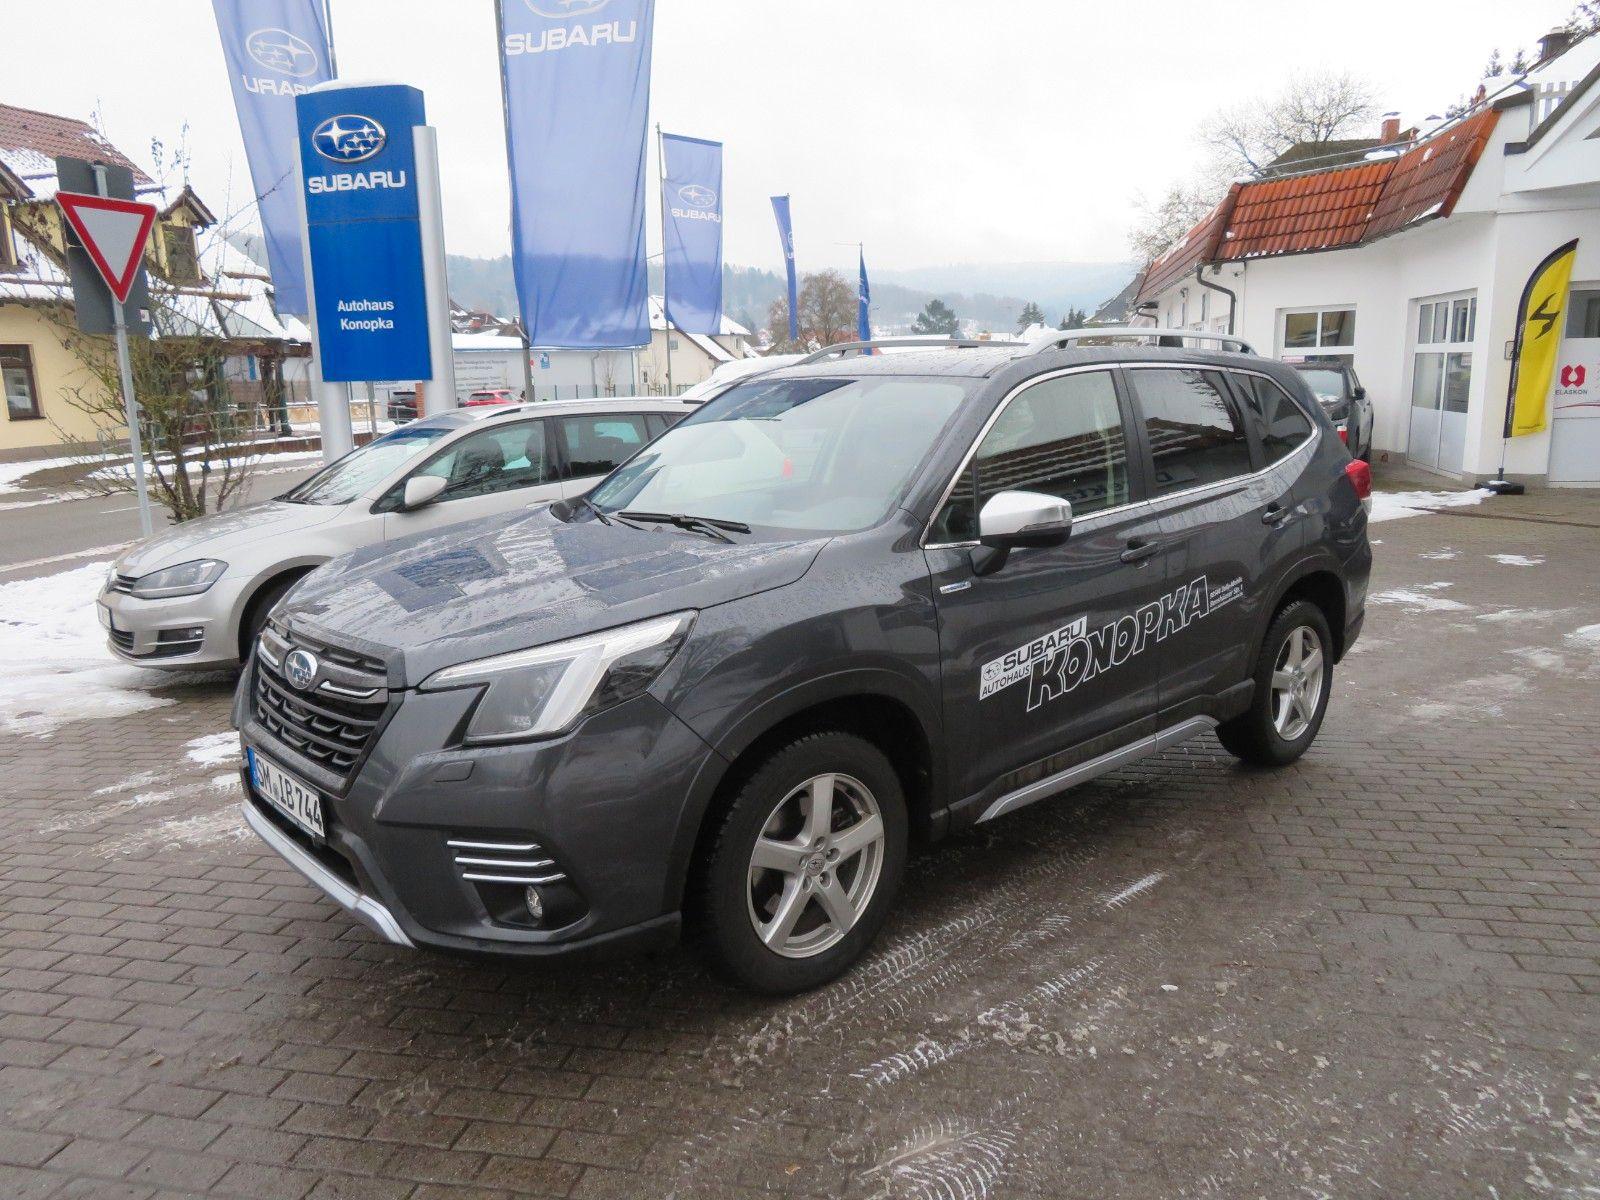 SUBARU Forester 2.0ie Active